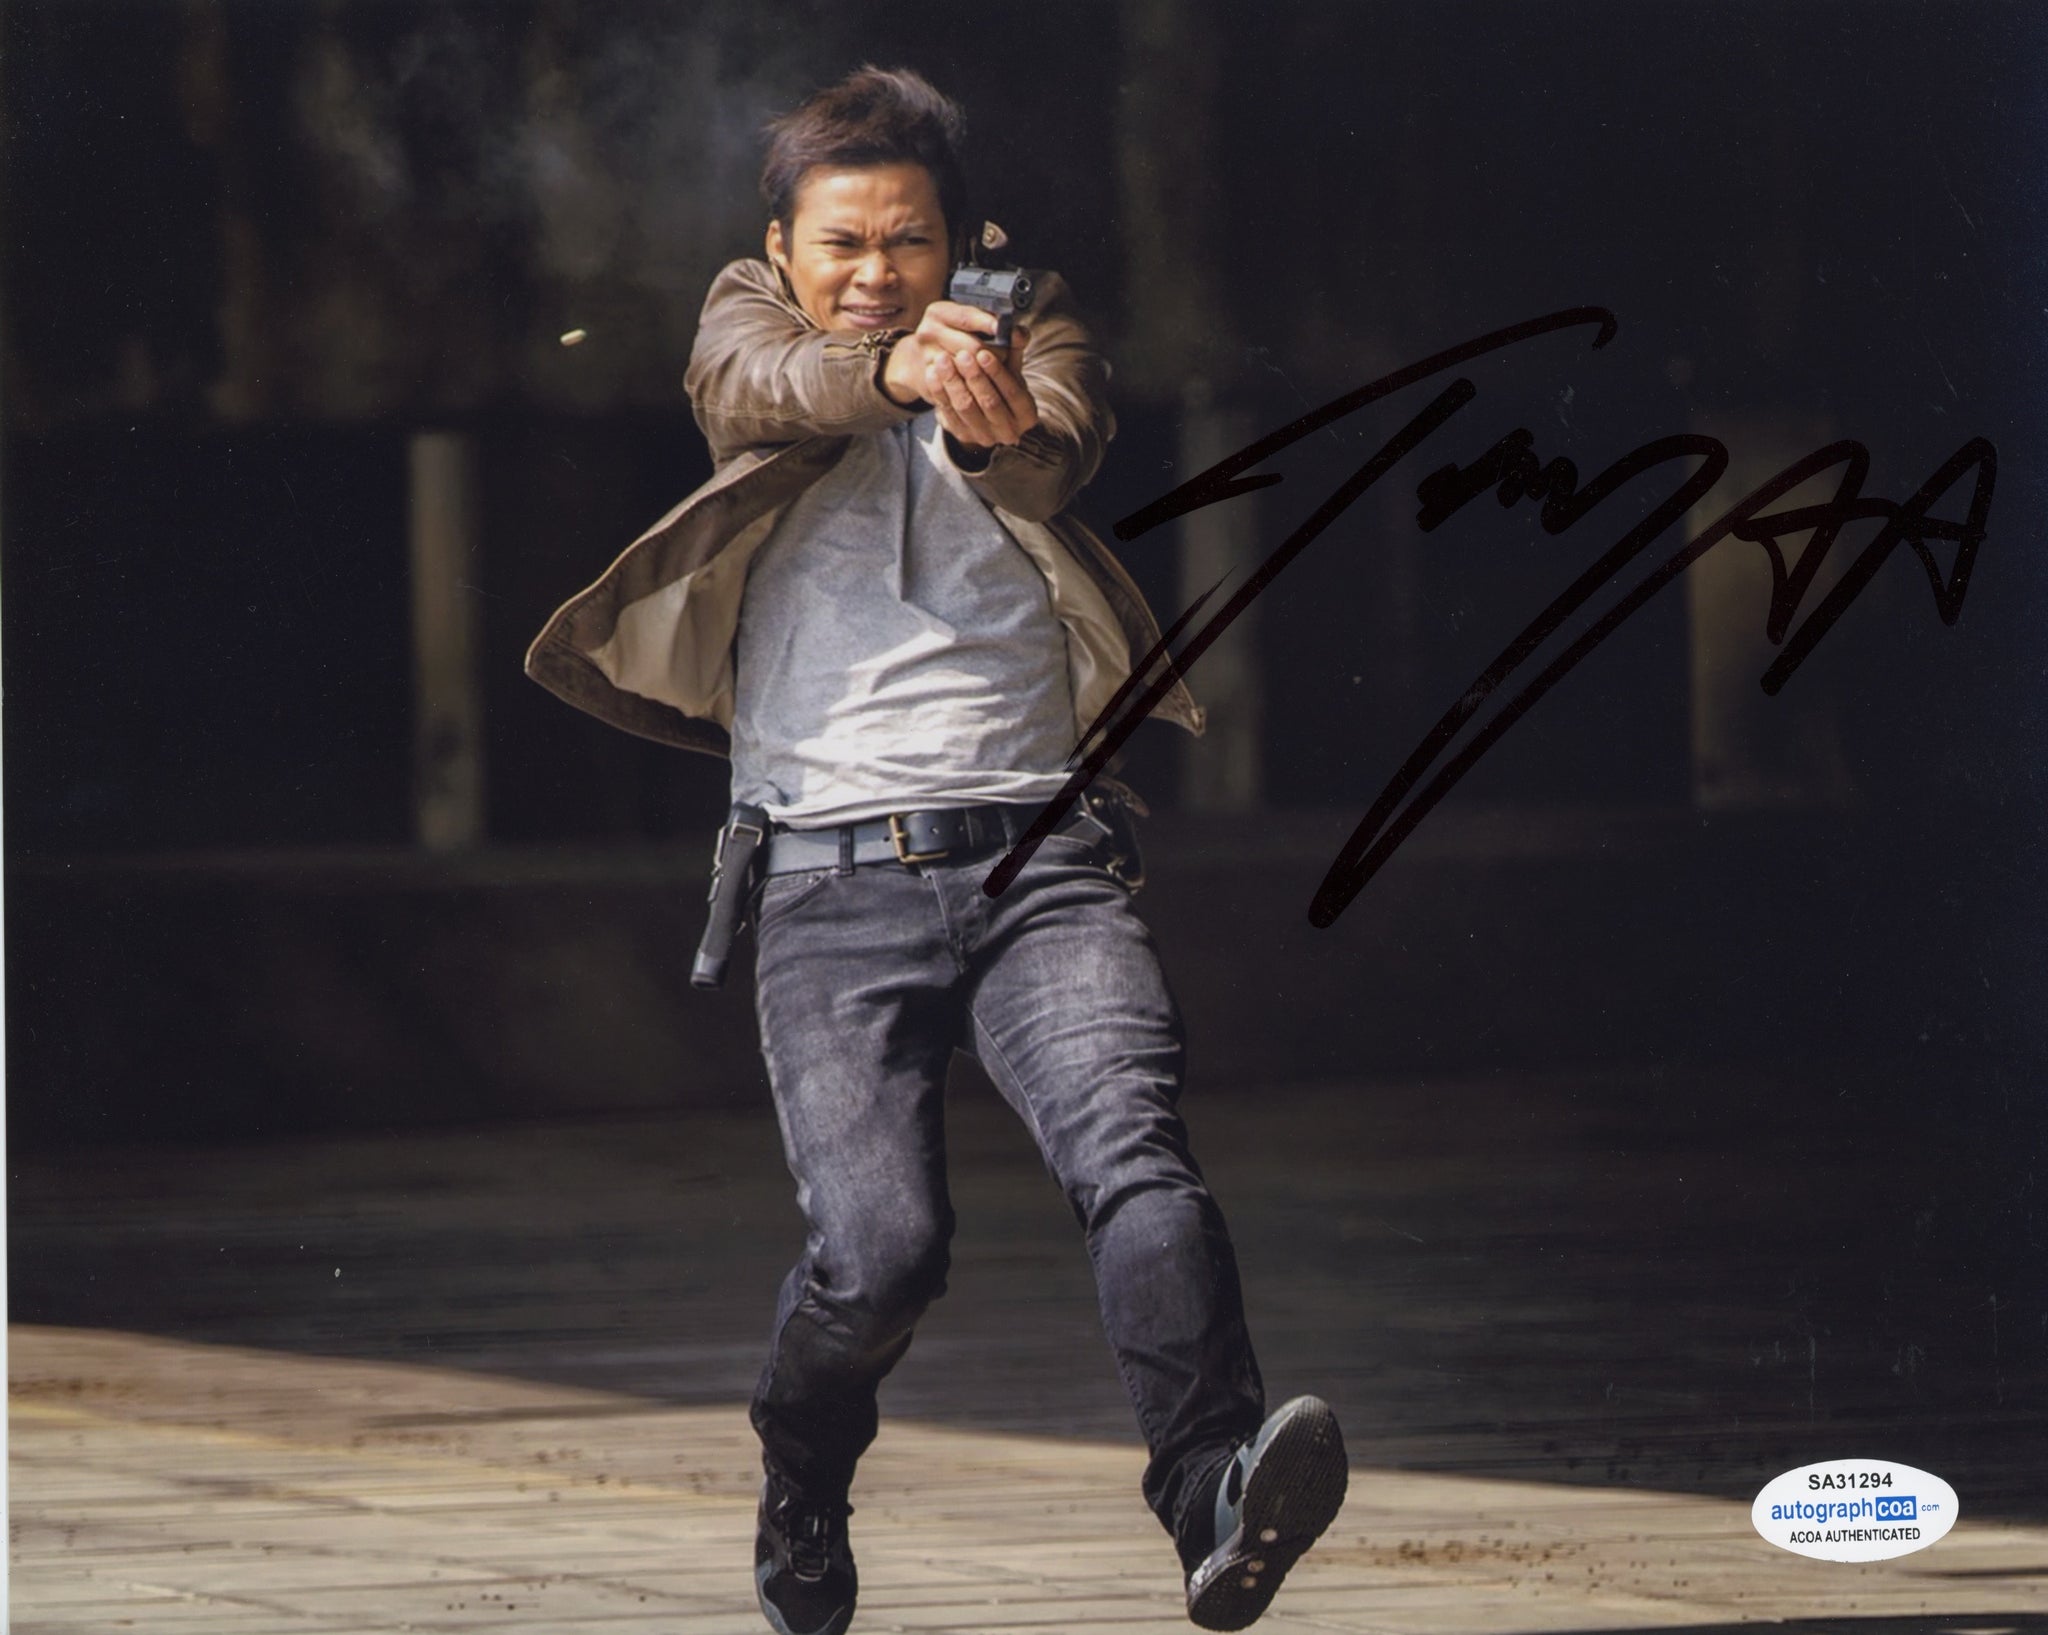 Tony Jaa Skin Trade Signed Autograph 8x10 Photo ACOA Authentic #14 - Outlaw Hobbies Authentic Autographs